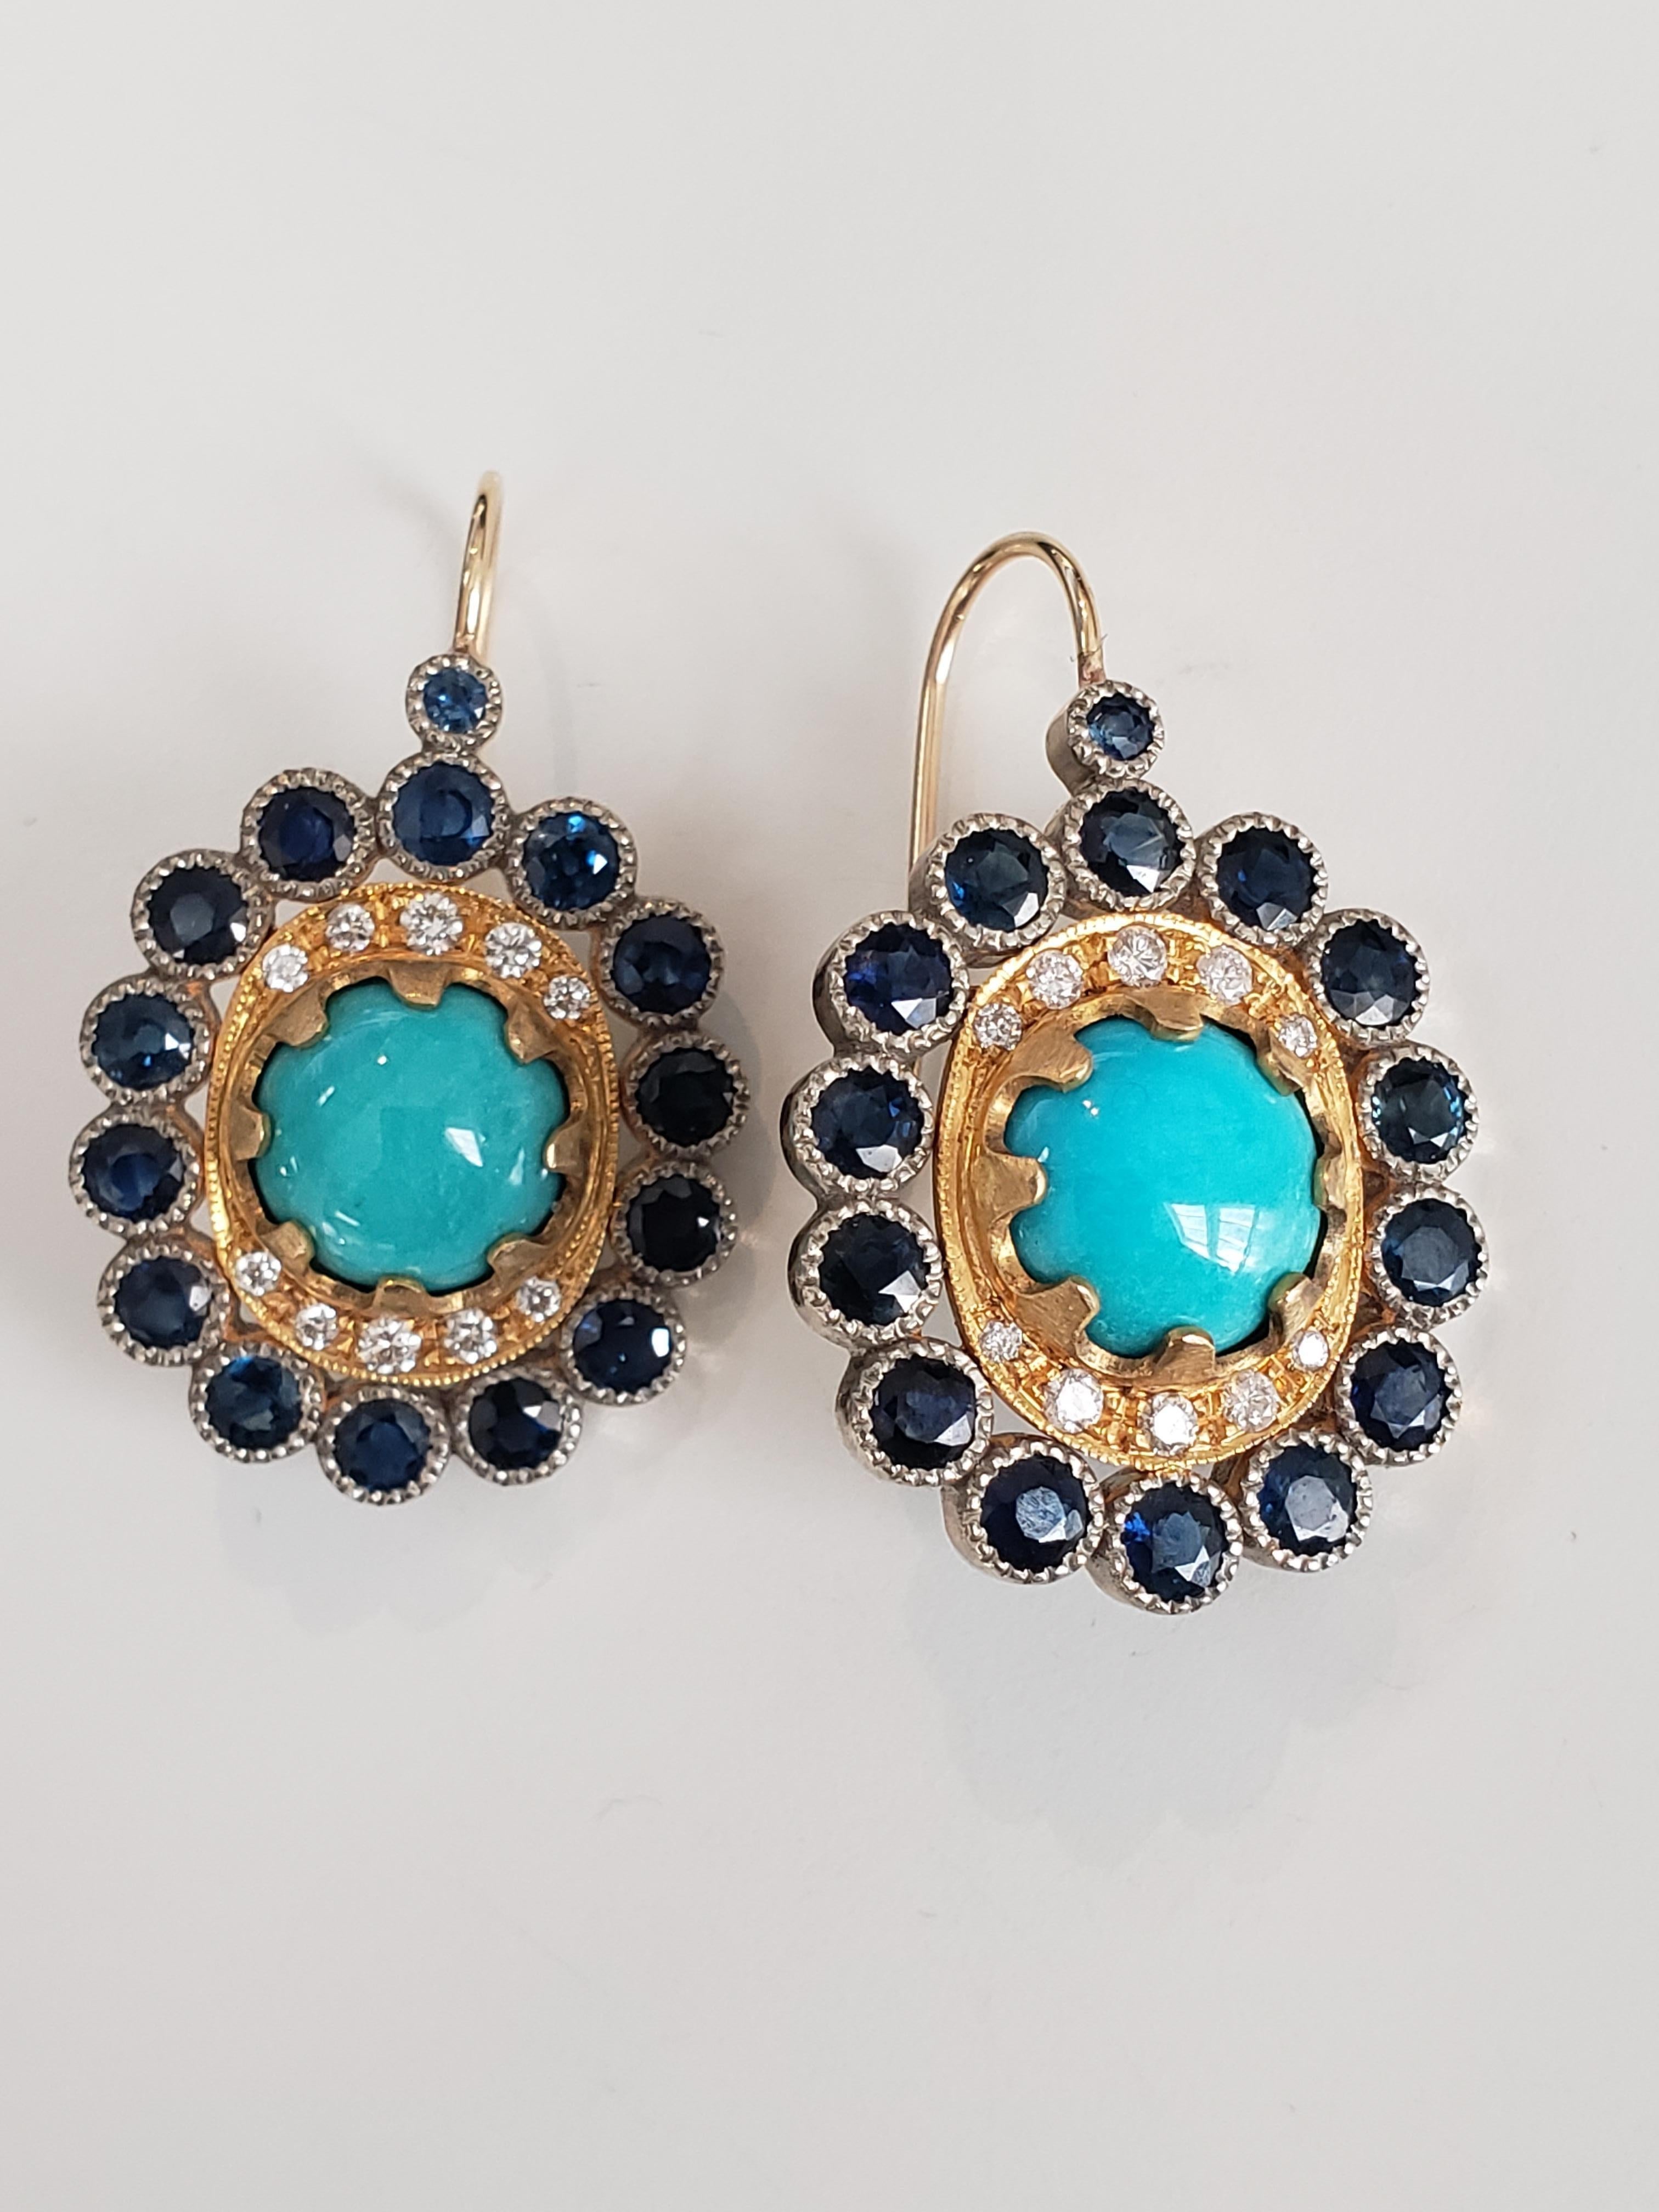 Earrings- Sleeping Beauty Turquoise set in 14K White Gold with Blue Sapphire. 
Turquise 5.0cts
Blue Sapphire 7.0cts
Diamond .15cts
Hand Miligrain details and mixing colors of gold gives these earnings a timeless quality. 